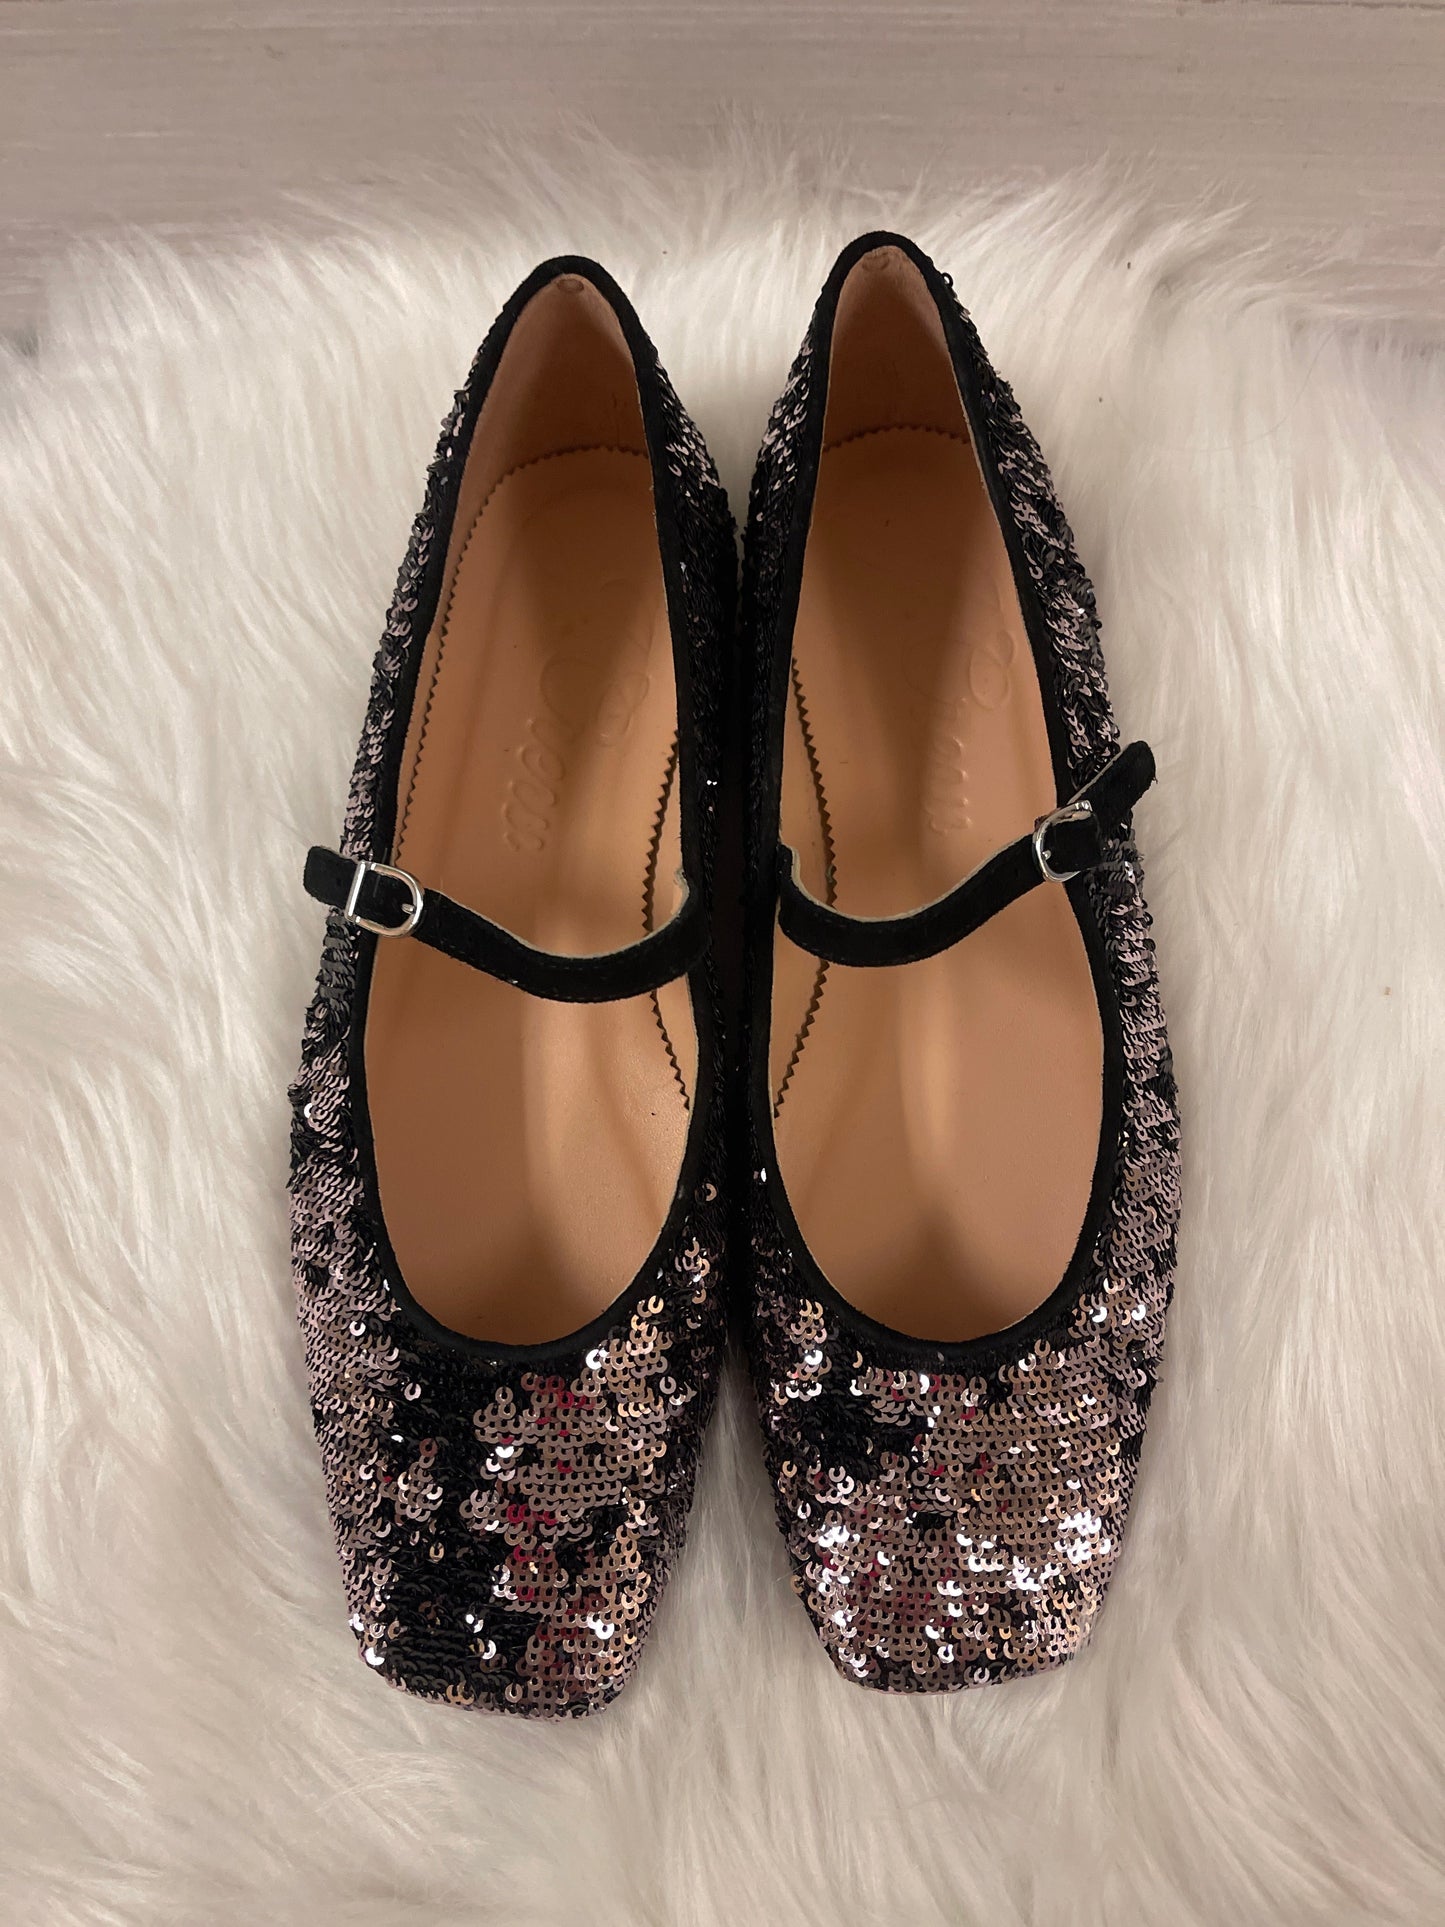 Shoes Flats Ballet By J Crew  Size: 7